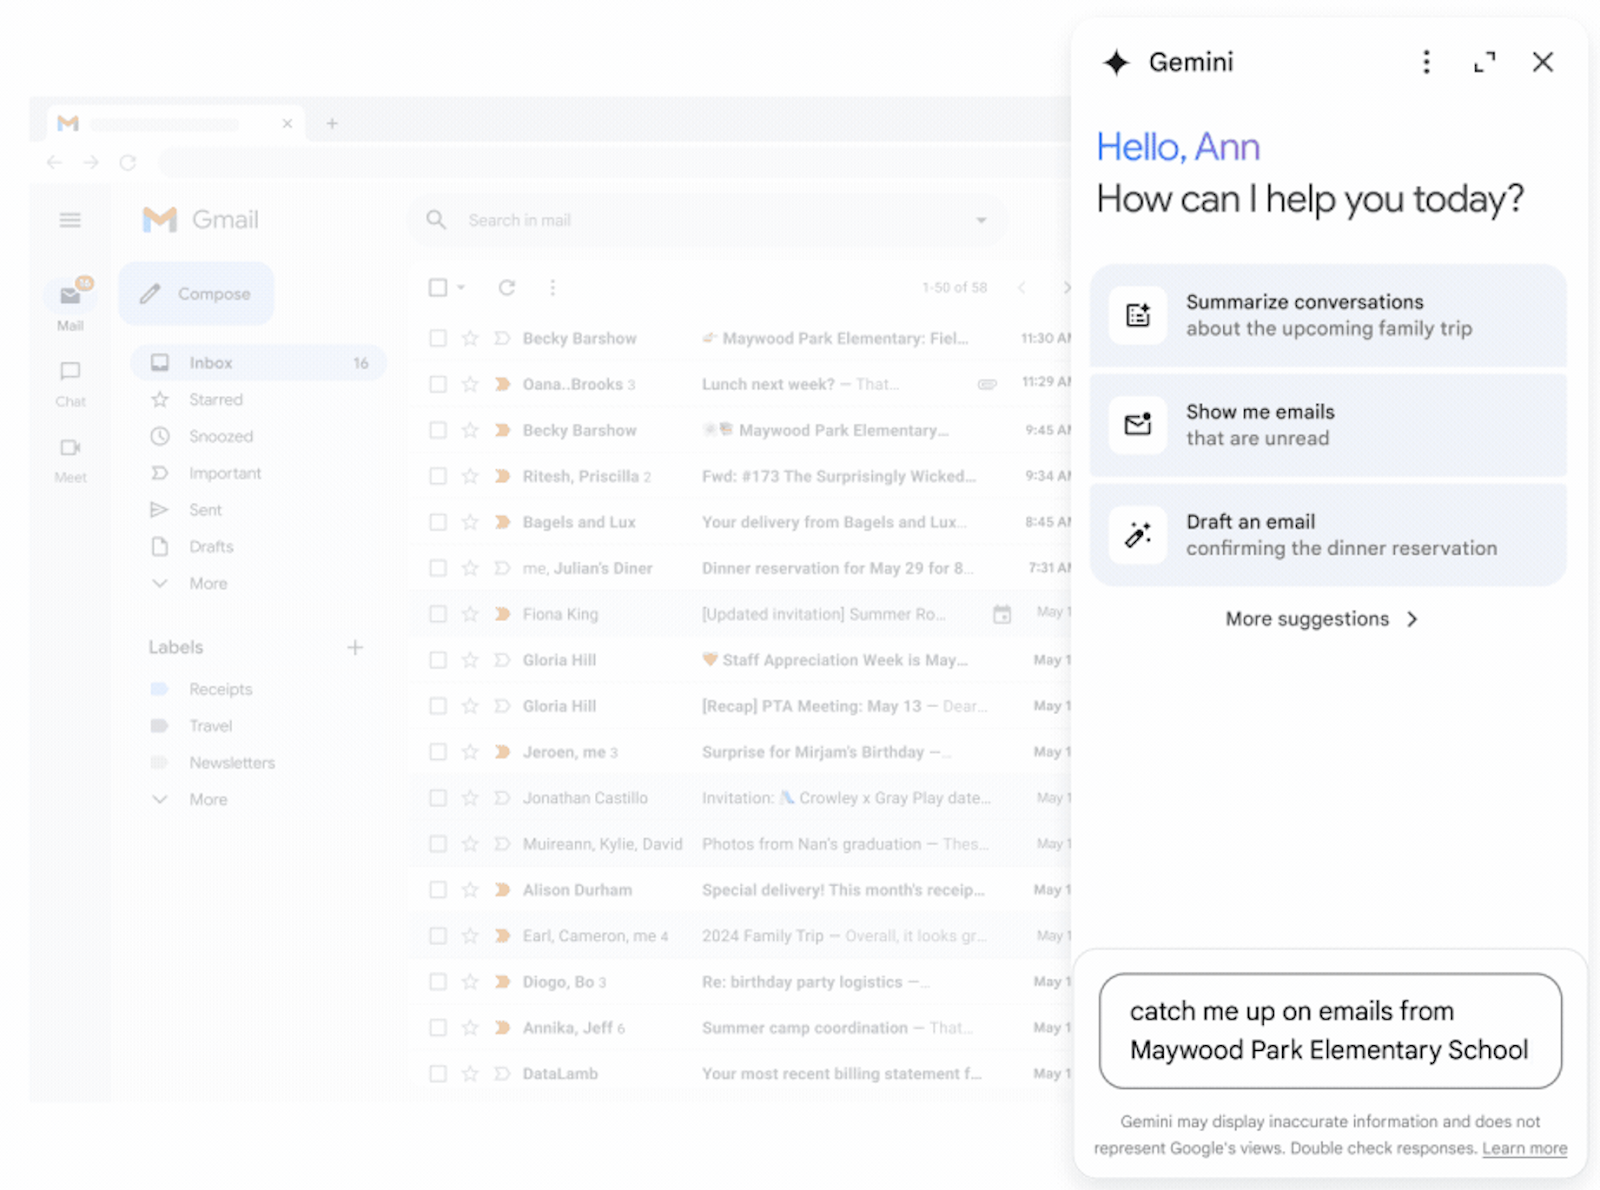 Google rolls out a Gemini side panel to Docs, Sheets, Slides, Drive, and Gmail